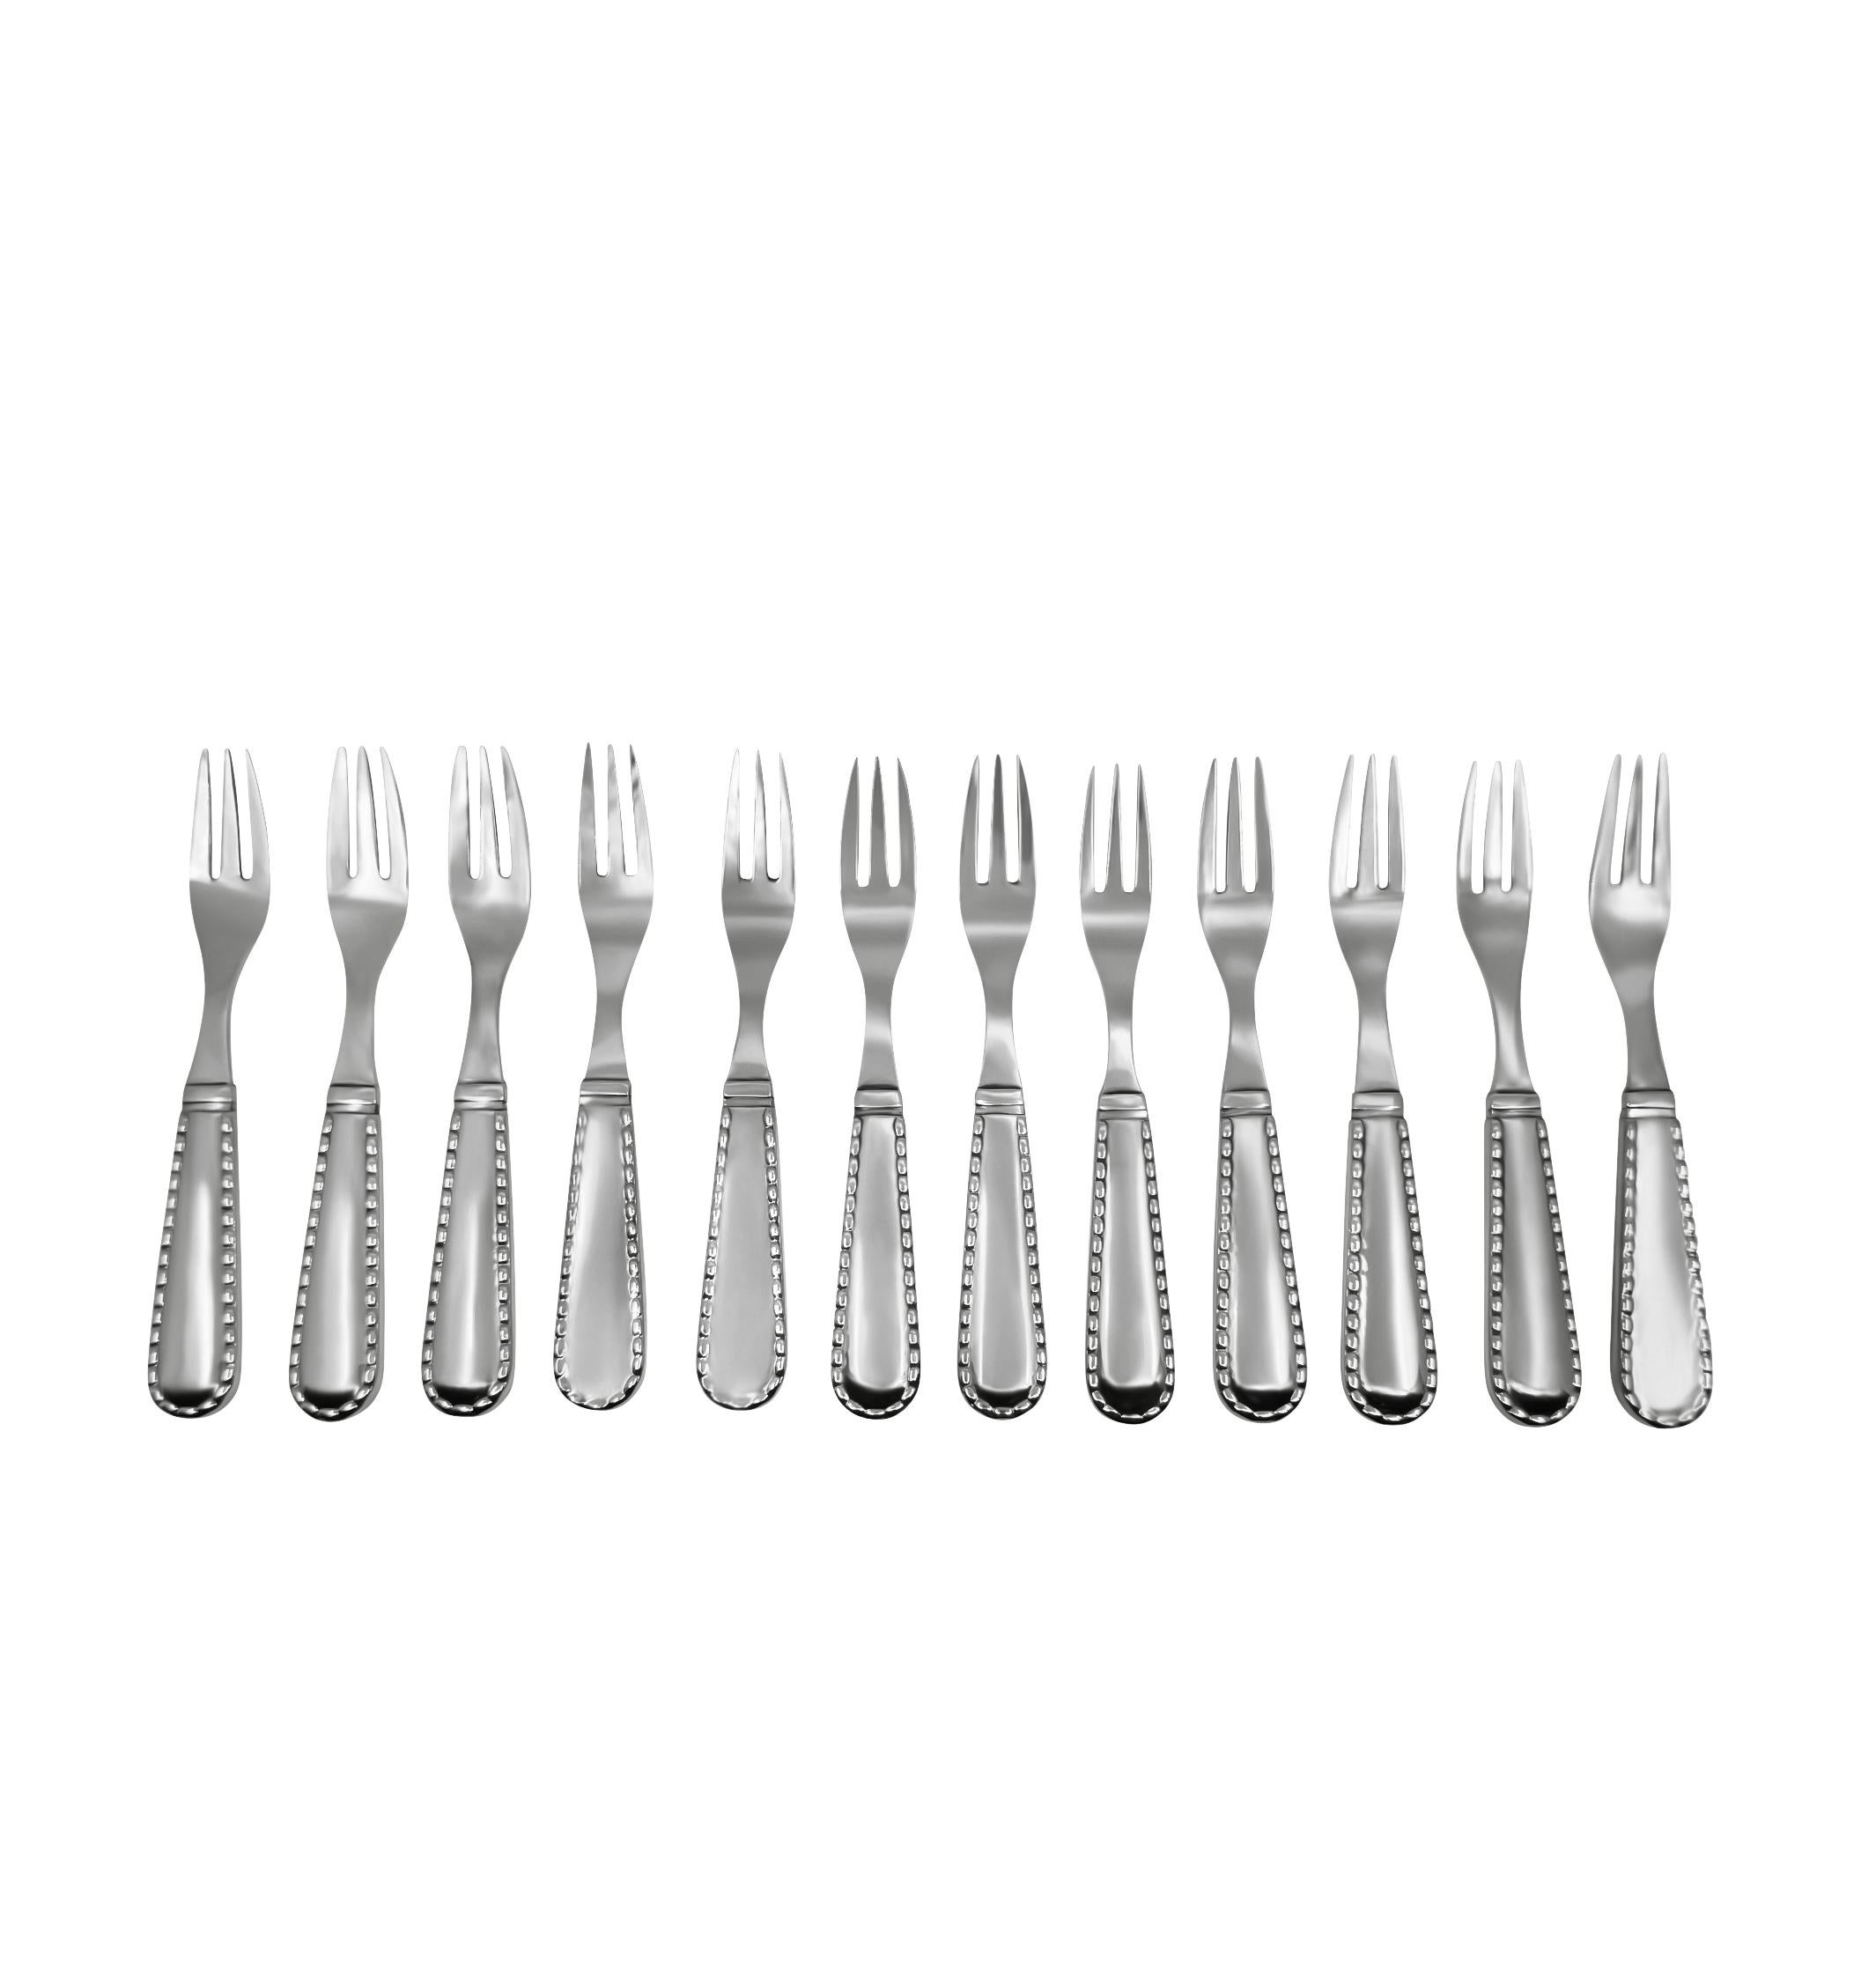 Extensive Georg Jensen Rope Sterling Silverware Service In Excellent Condition For Sale In Hellerup, DK